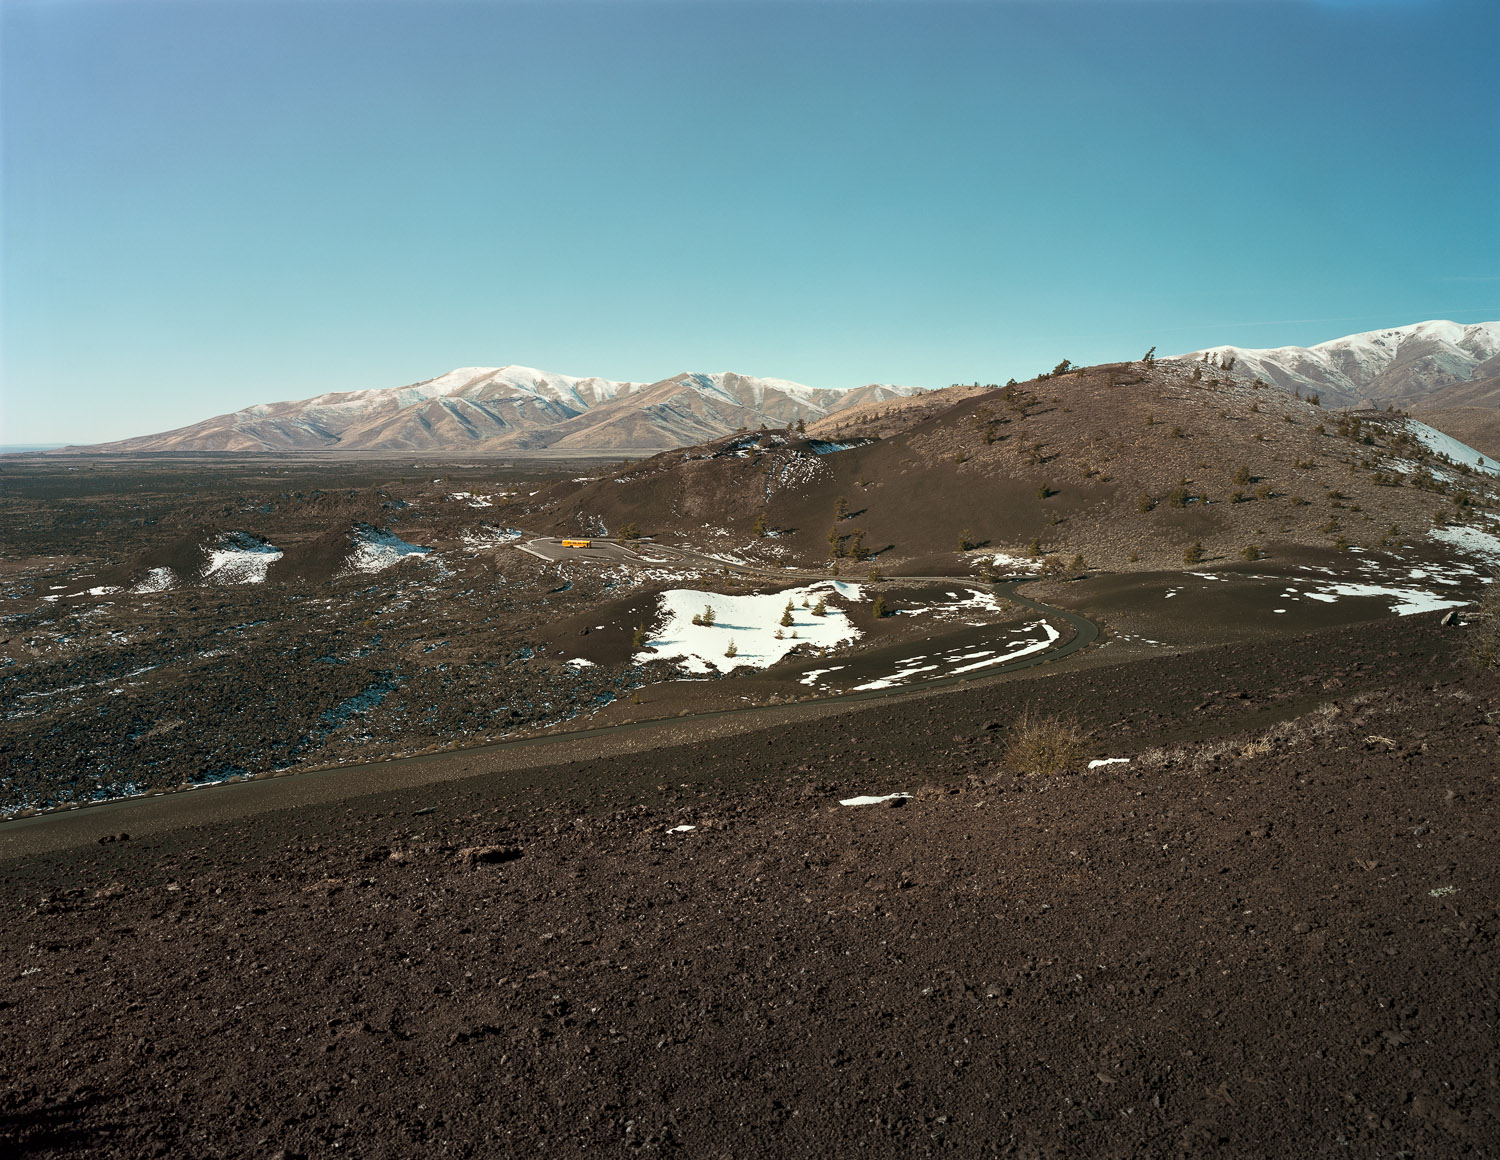  View from Inferno Cone, Craters of the Moon National Monument and Preserve, Arco, ID, 2015 